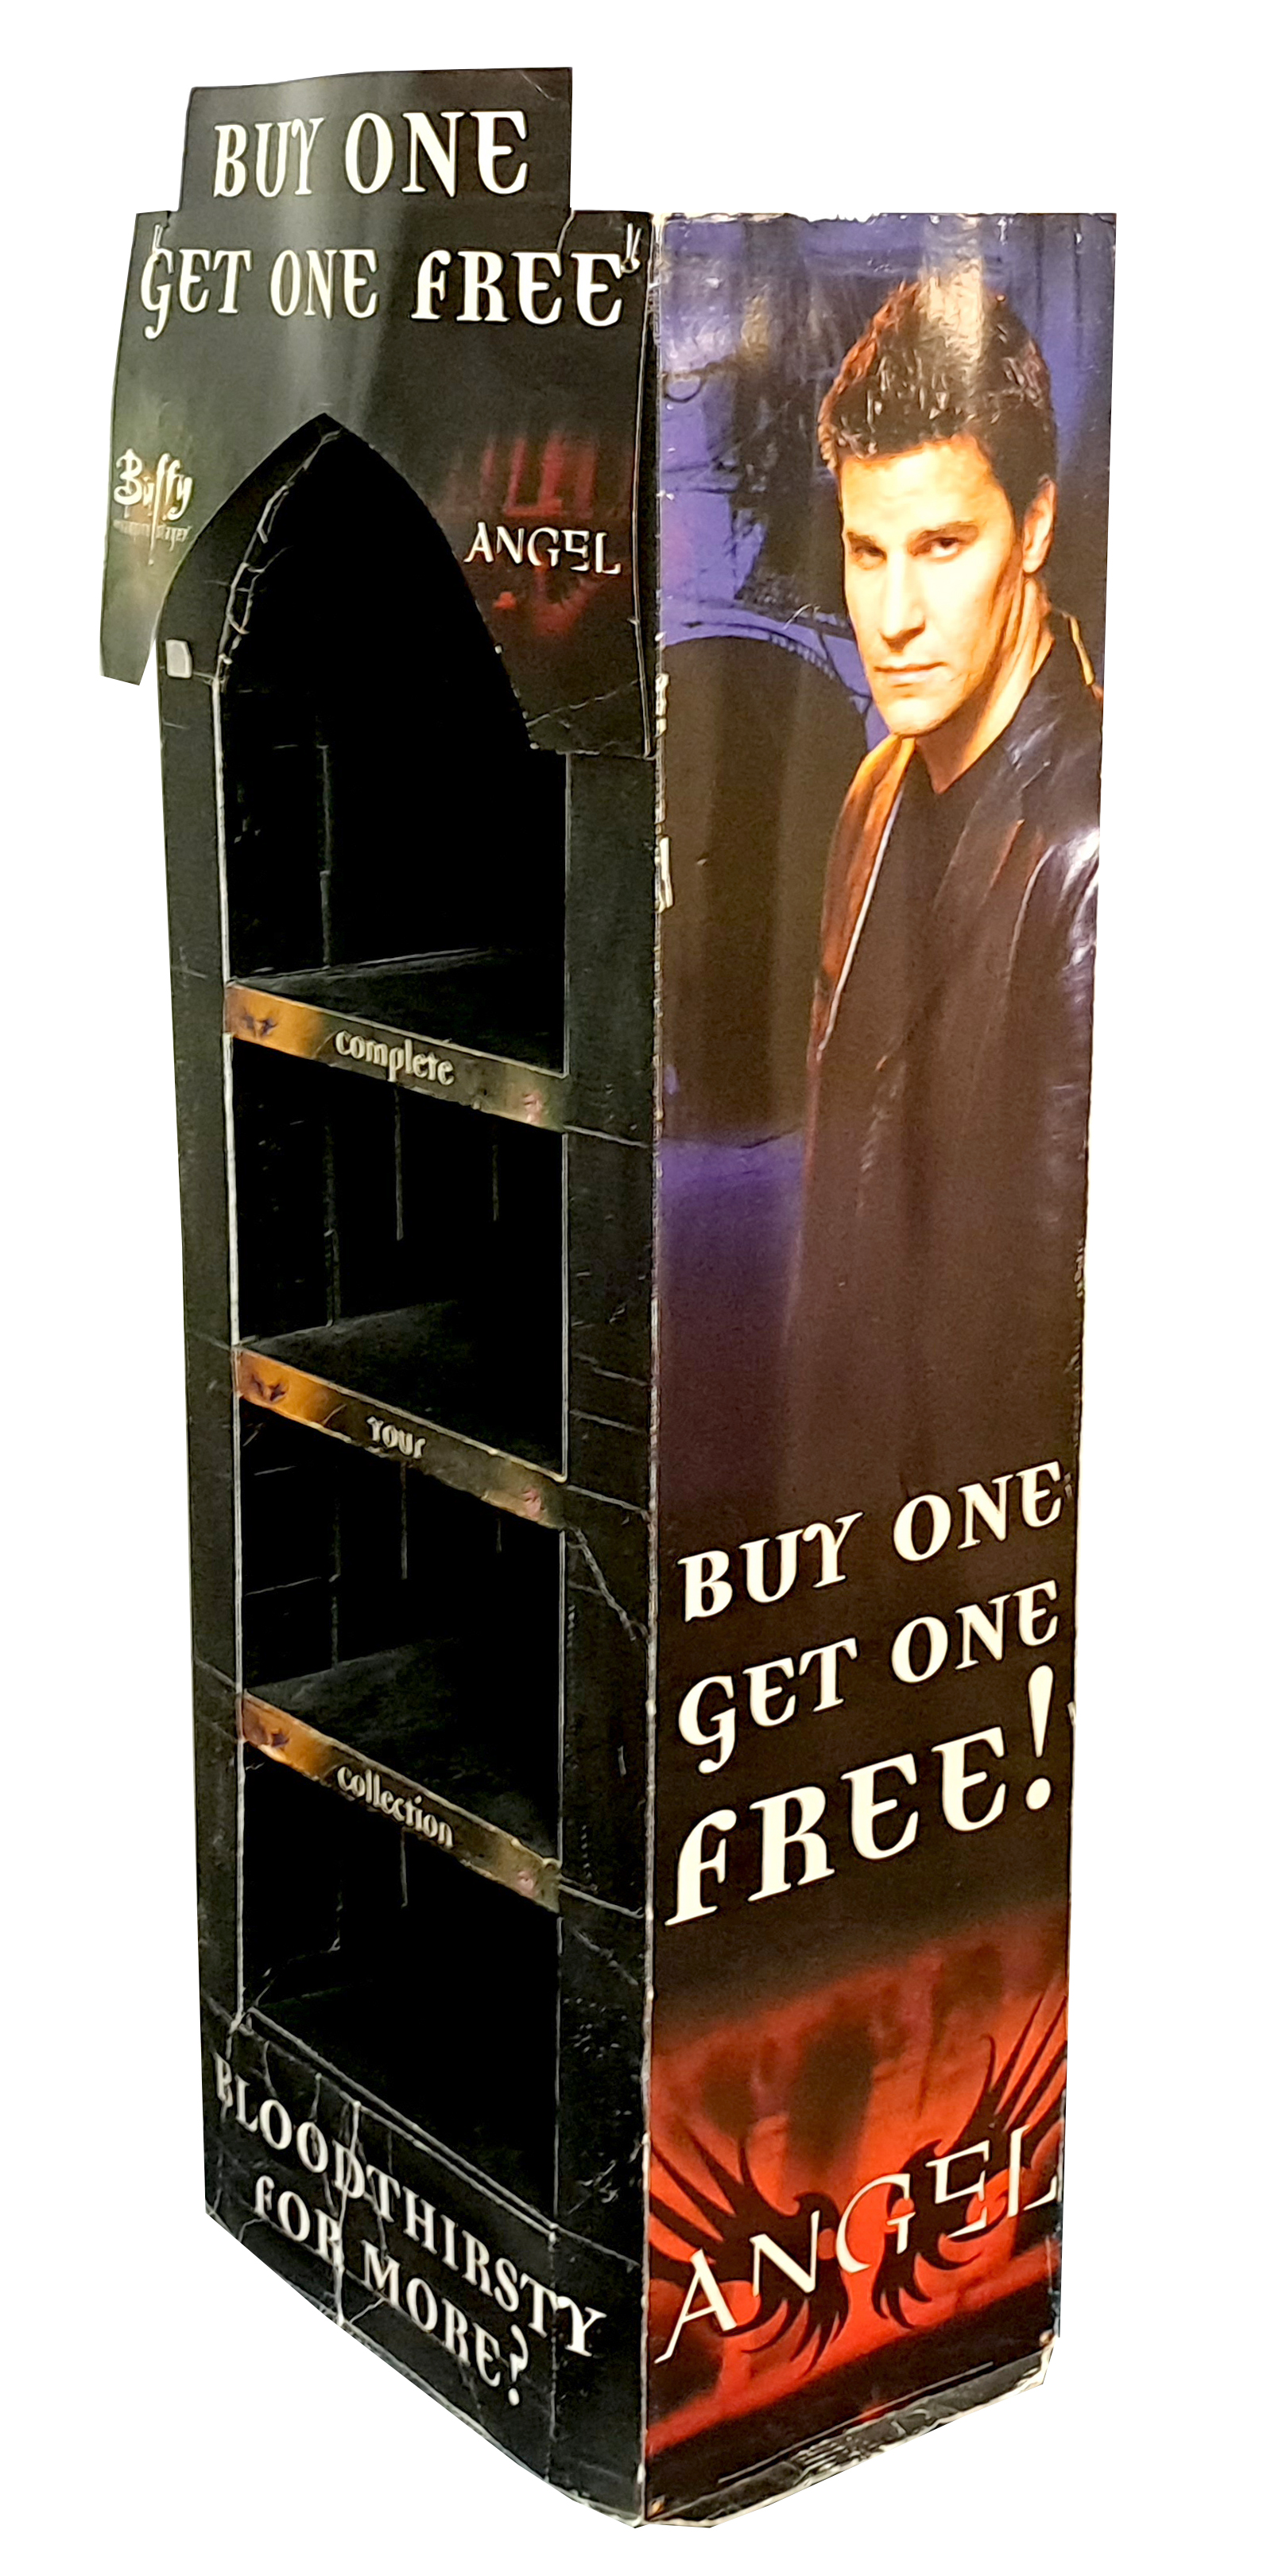 Buffy the Vampire Slayer / Angel cardboard store display stand - Image 3 of 3